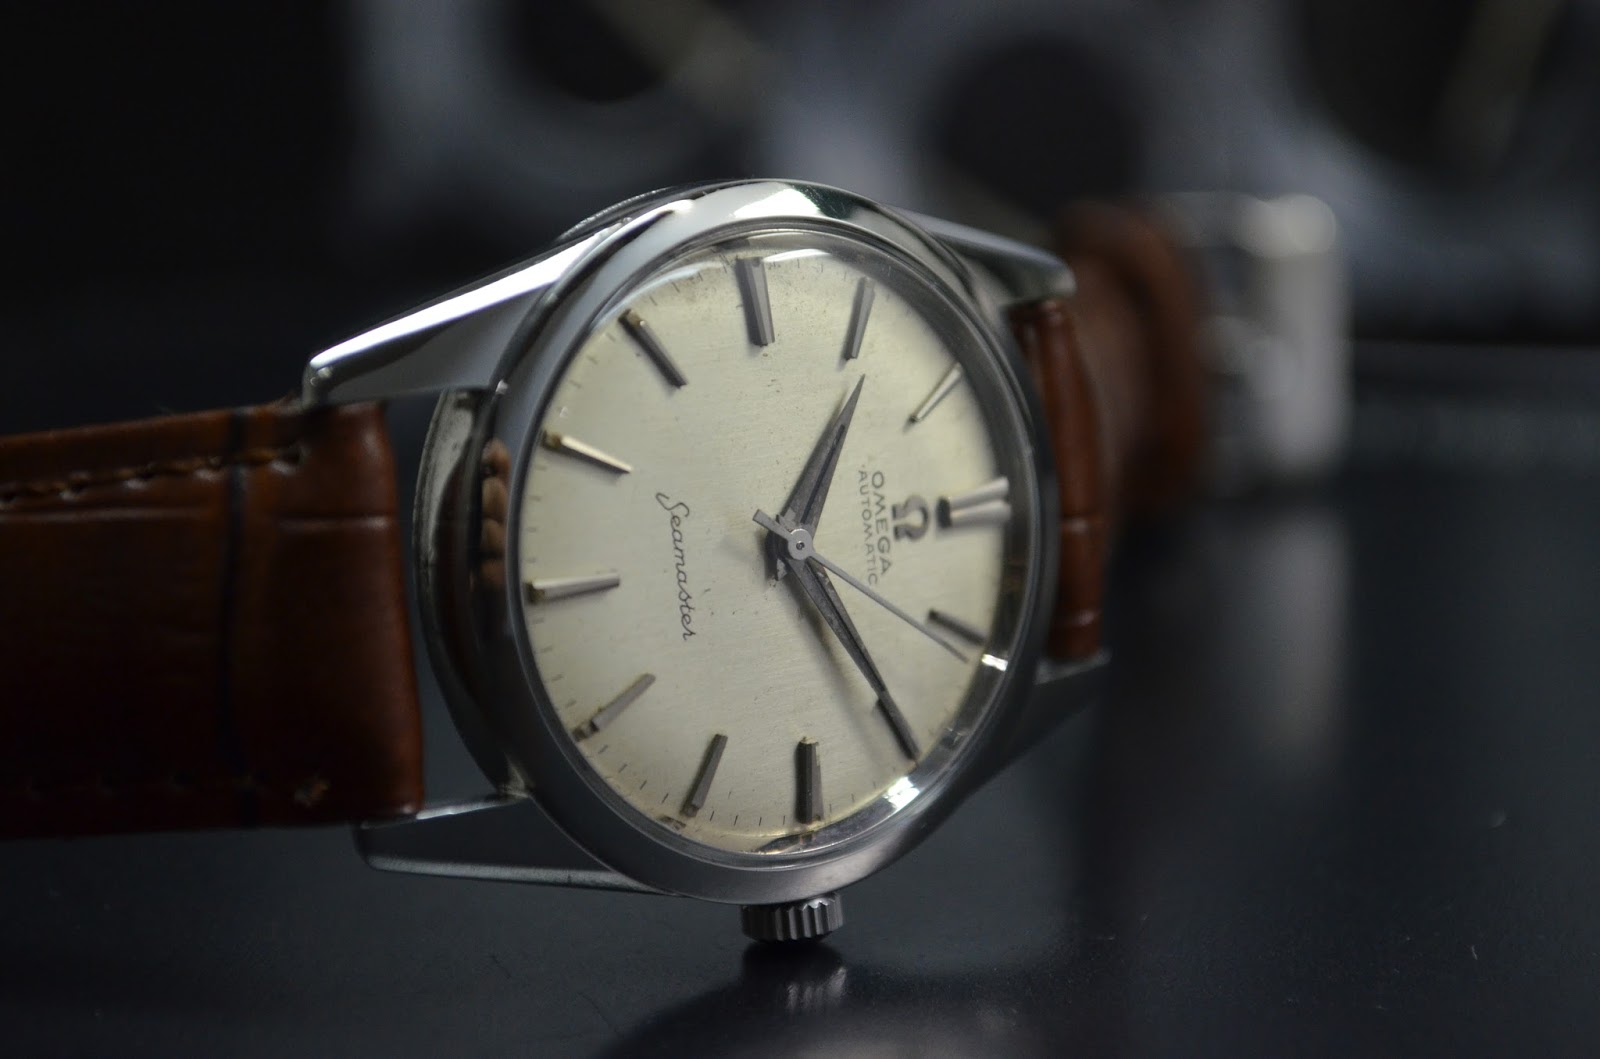 Antique Watch and Timepiece Collection by Wrist Men Watches: AUTHENTIC ...